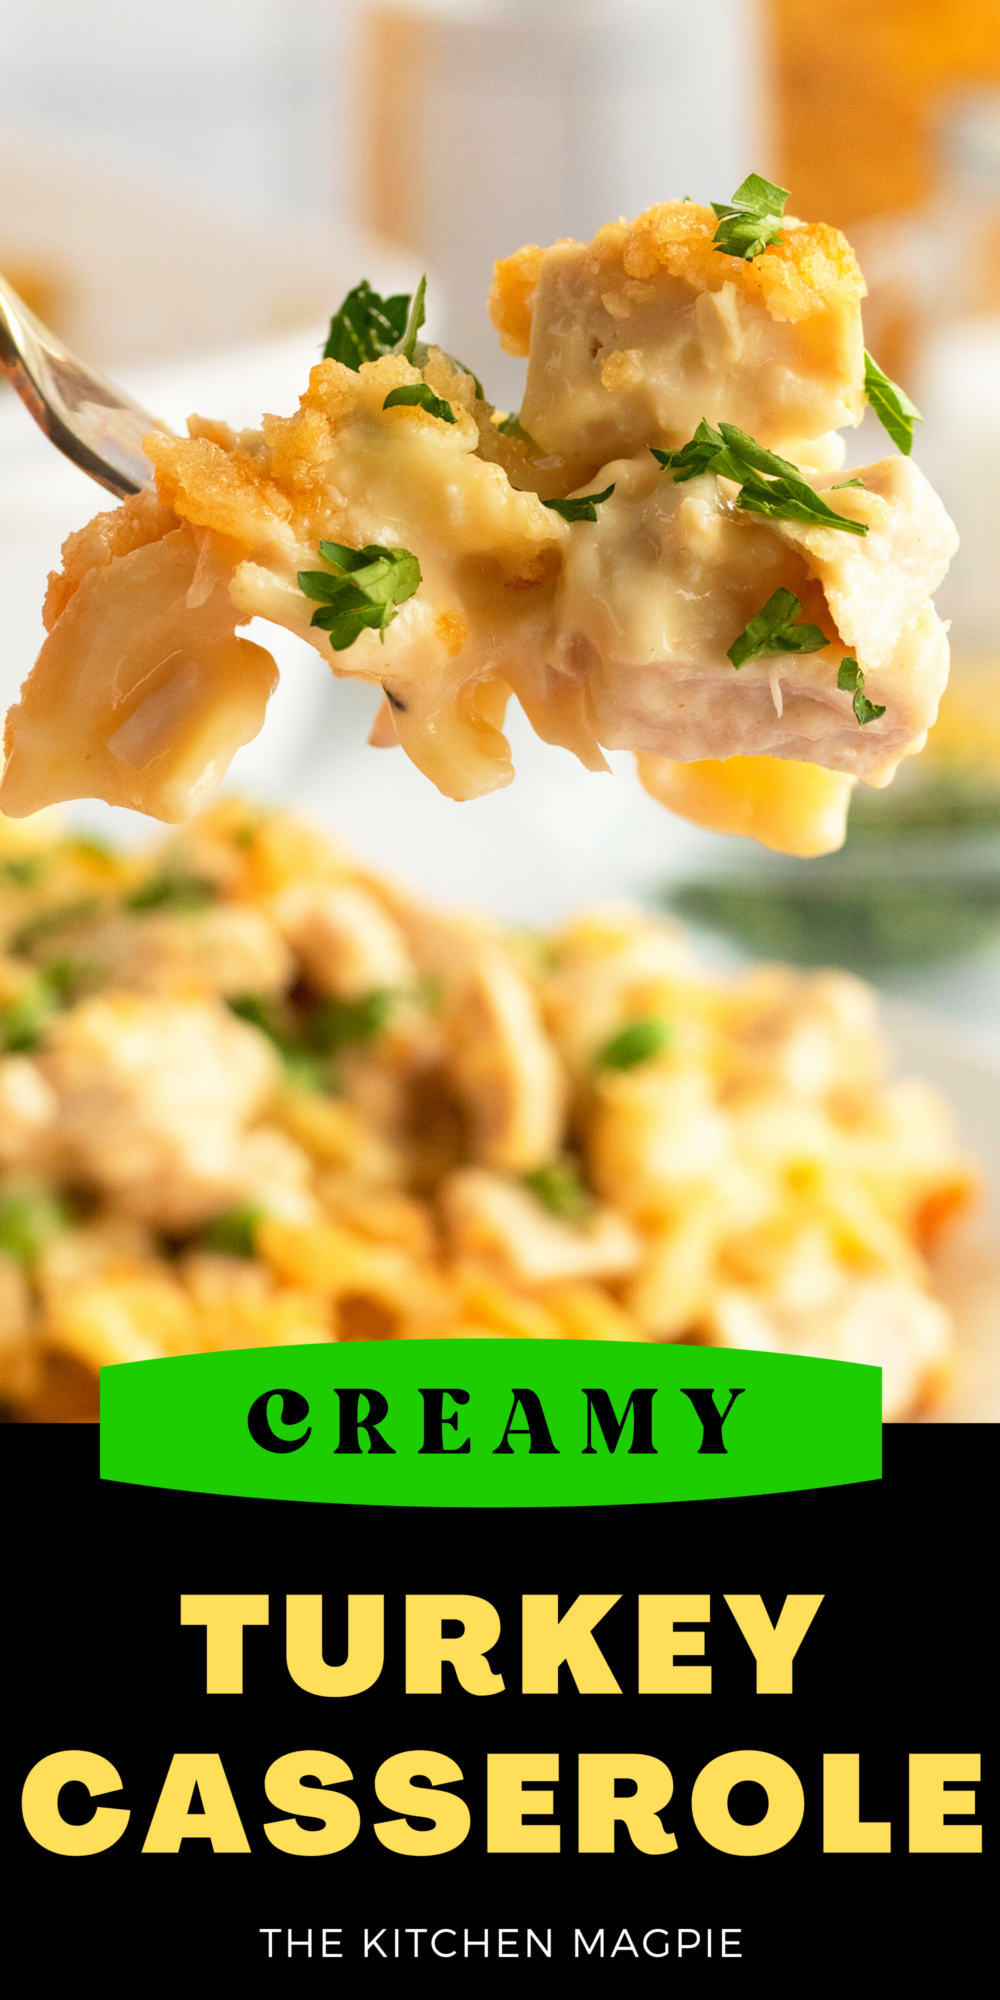 This creamy turkey casserole is guaranteed to hit the spot with tender chunks of turkey, soft noodles and a crispy buttery topping.